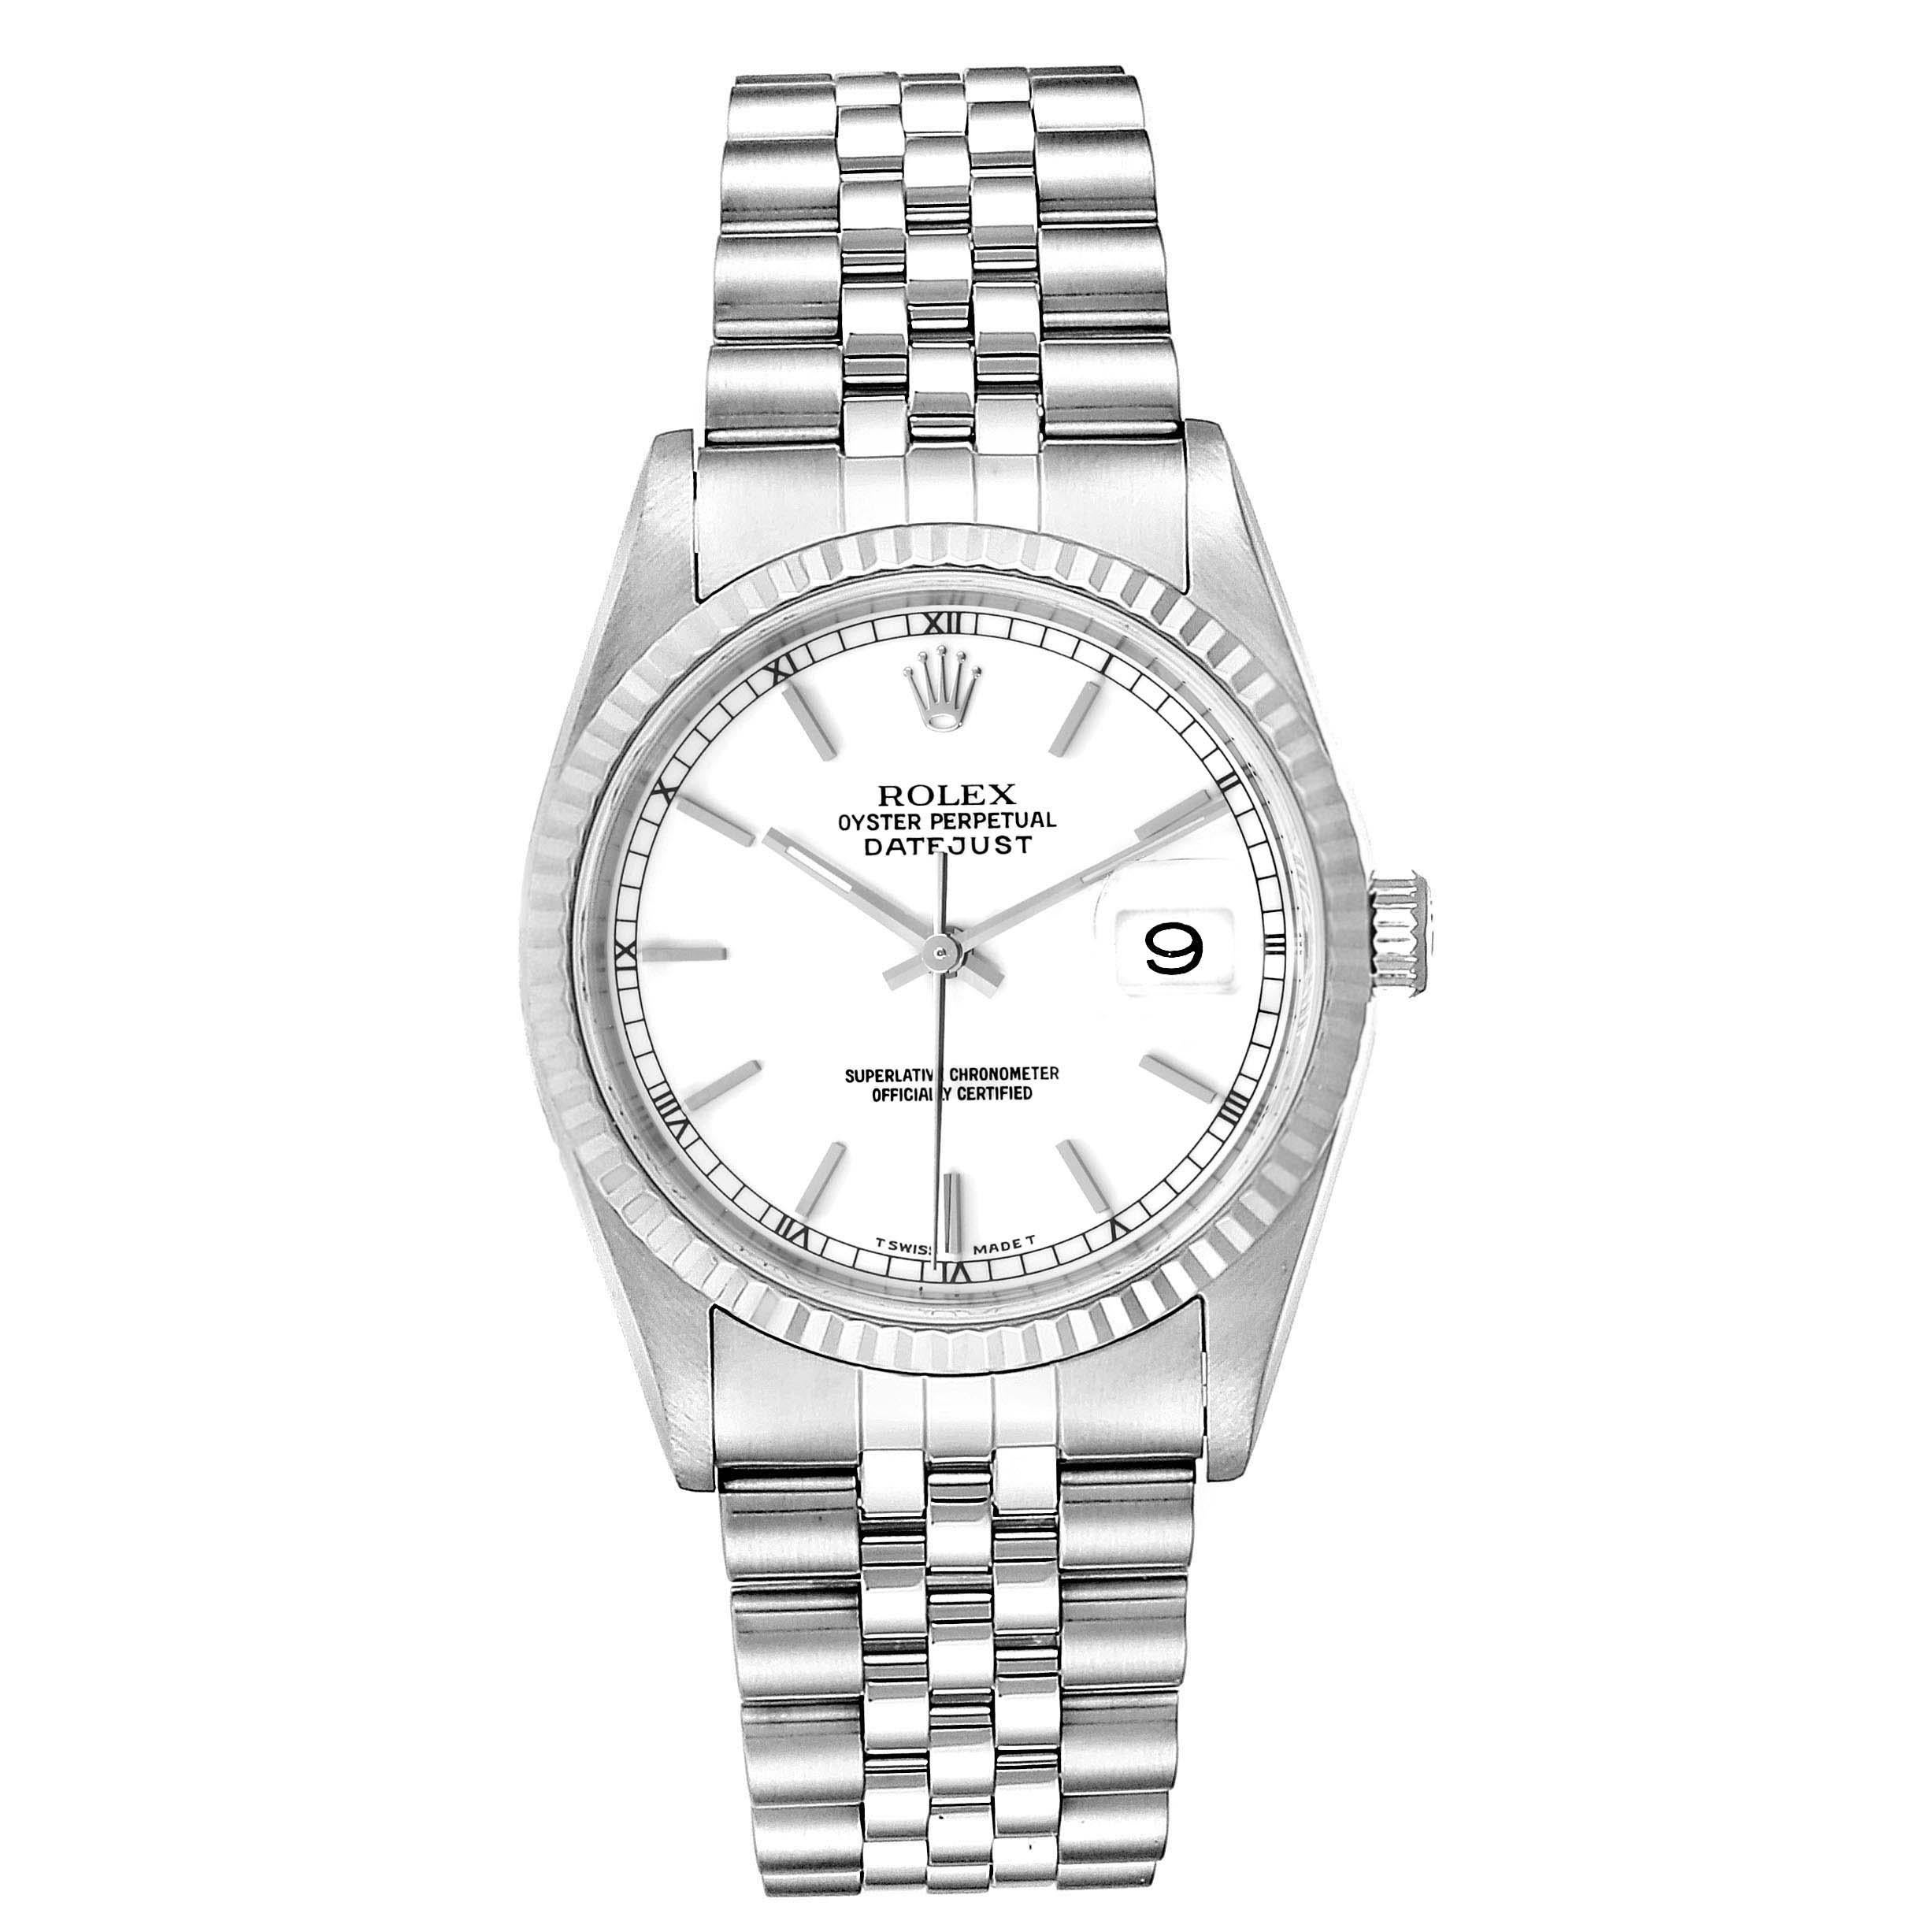 Rolex Datejust 36 Steel White Gold Jubilee Bracelet Mens Watch 16234. Officially certified chronometer self-winding movement. Stainless steel oyster case 36 mm in diameter. Rolex logo on a crown. 18k white gold fluted bezel. Scratch resistant